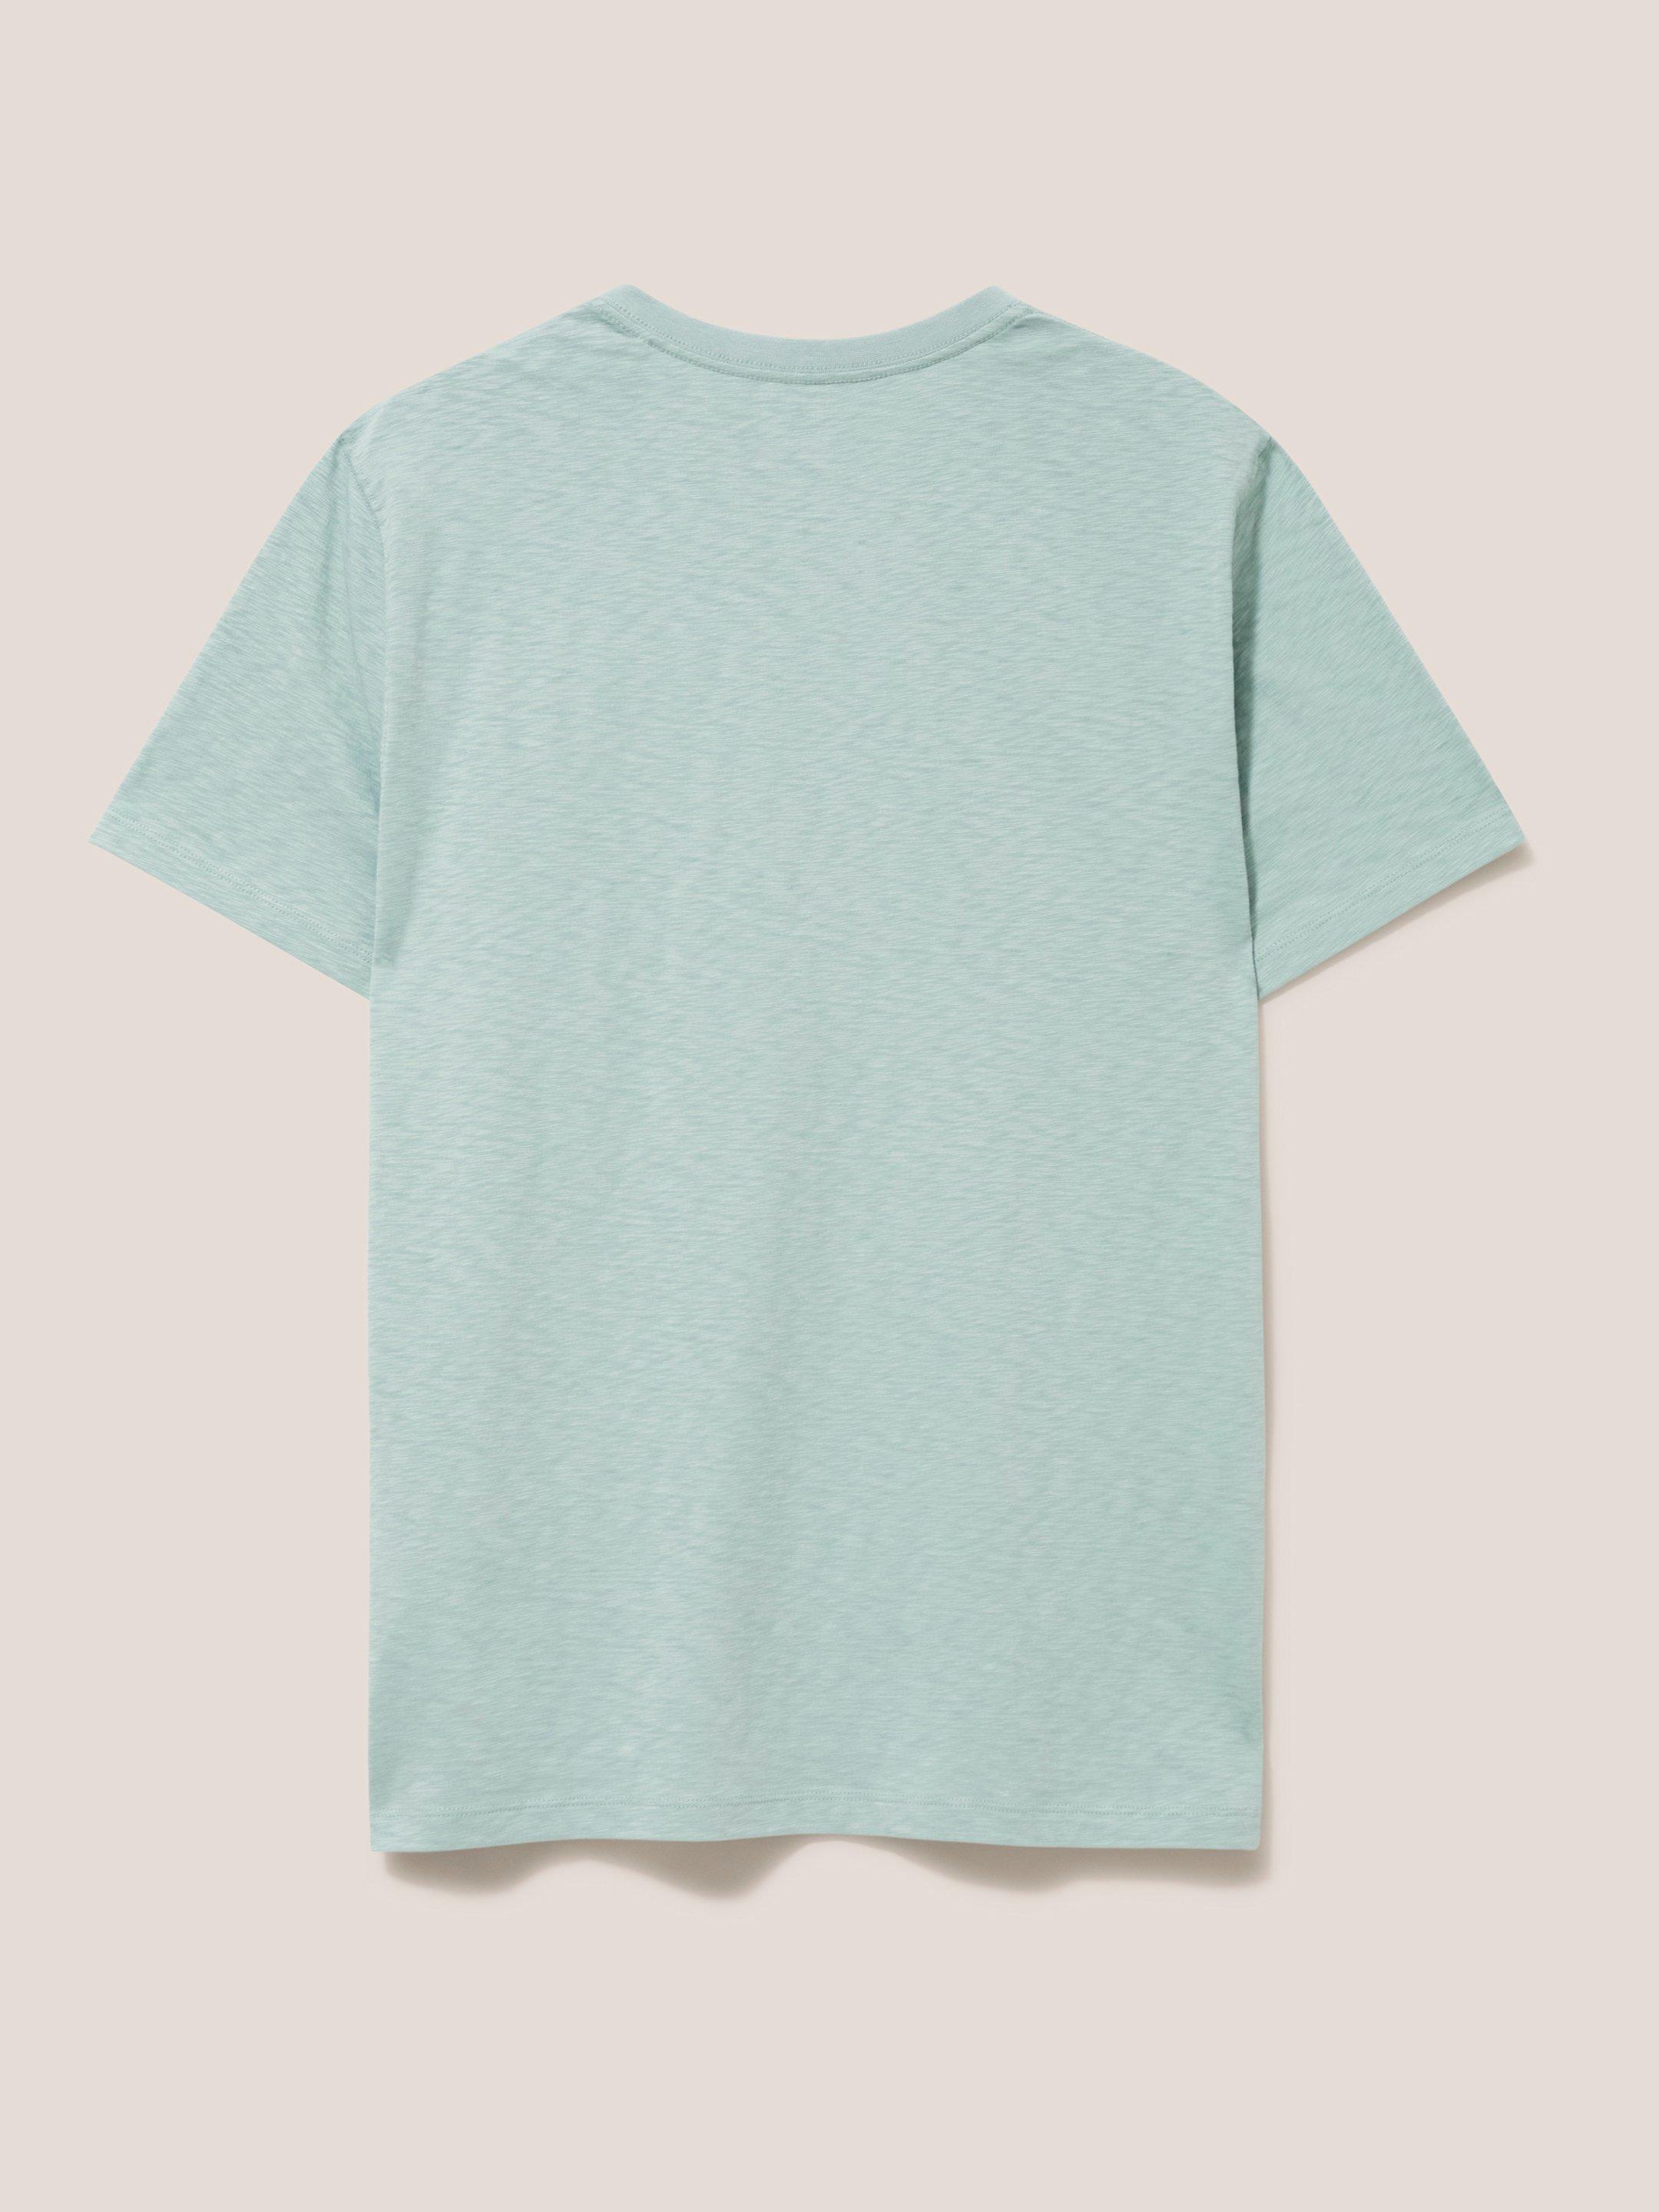 Escape Graphic Tee in MINT GREEN - FLAT BACK